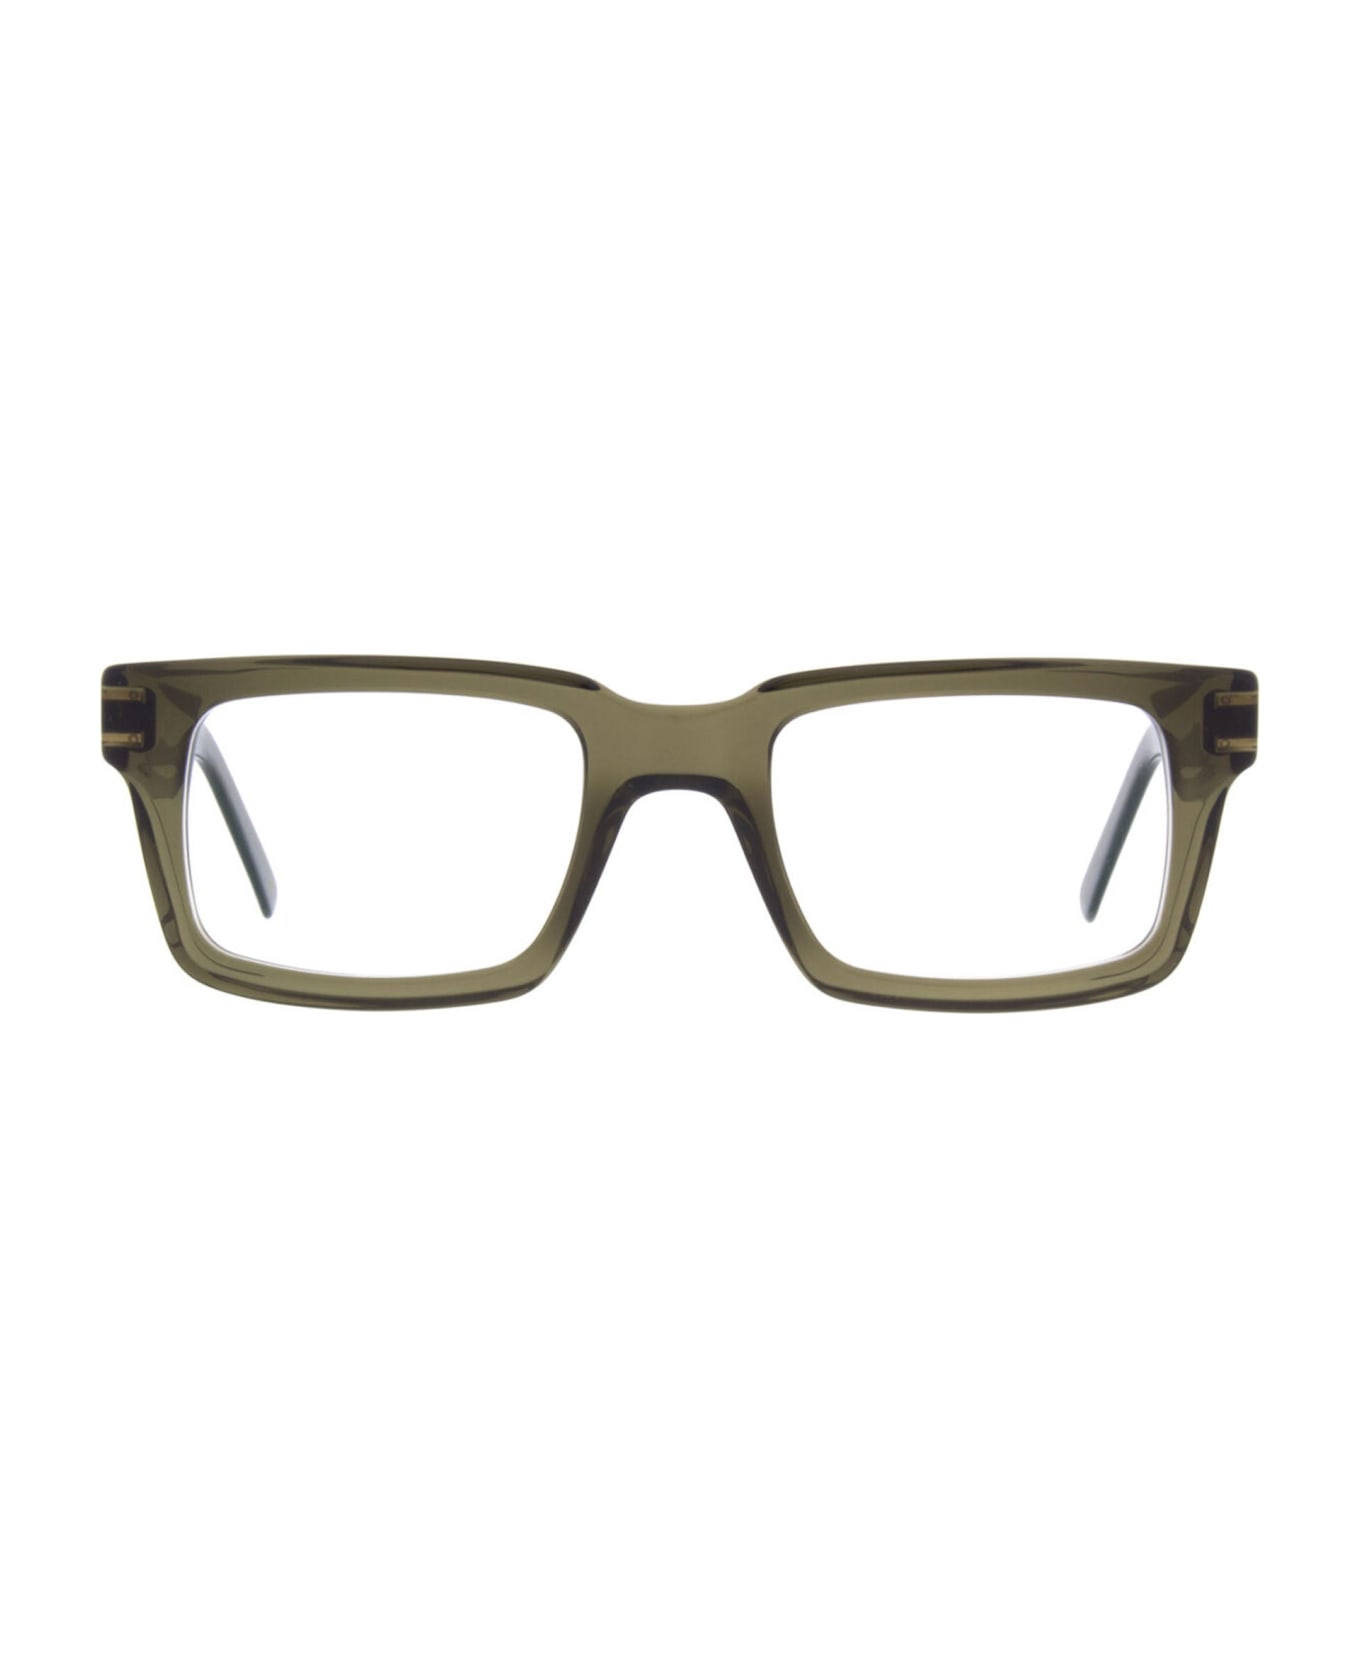 Andy Wolf Aw04 - Green Glasses - green